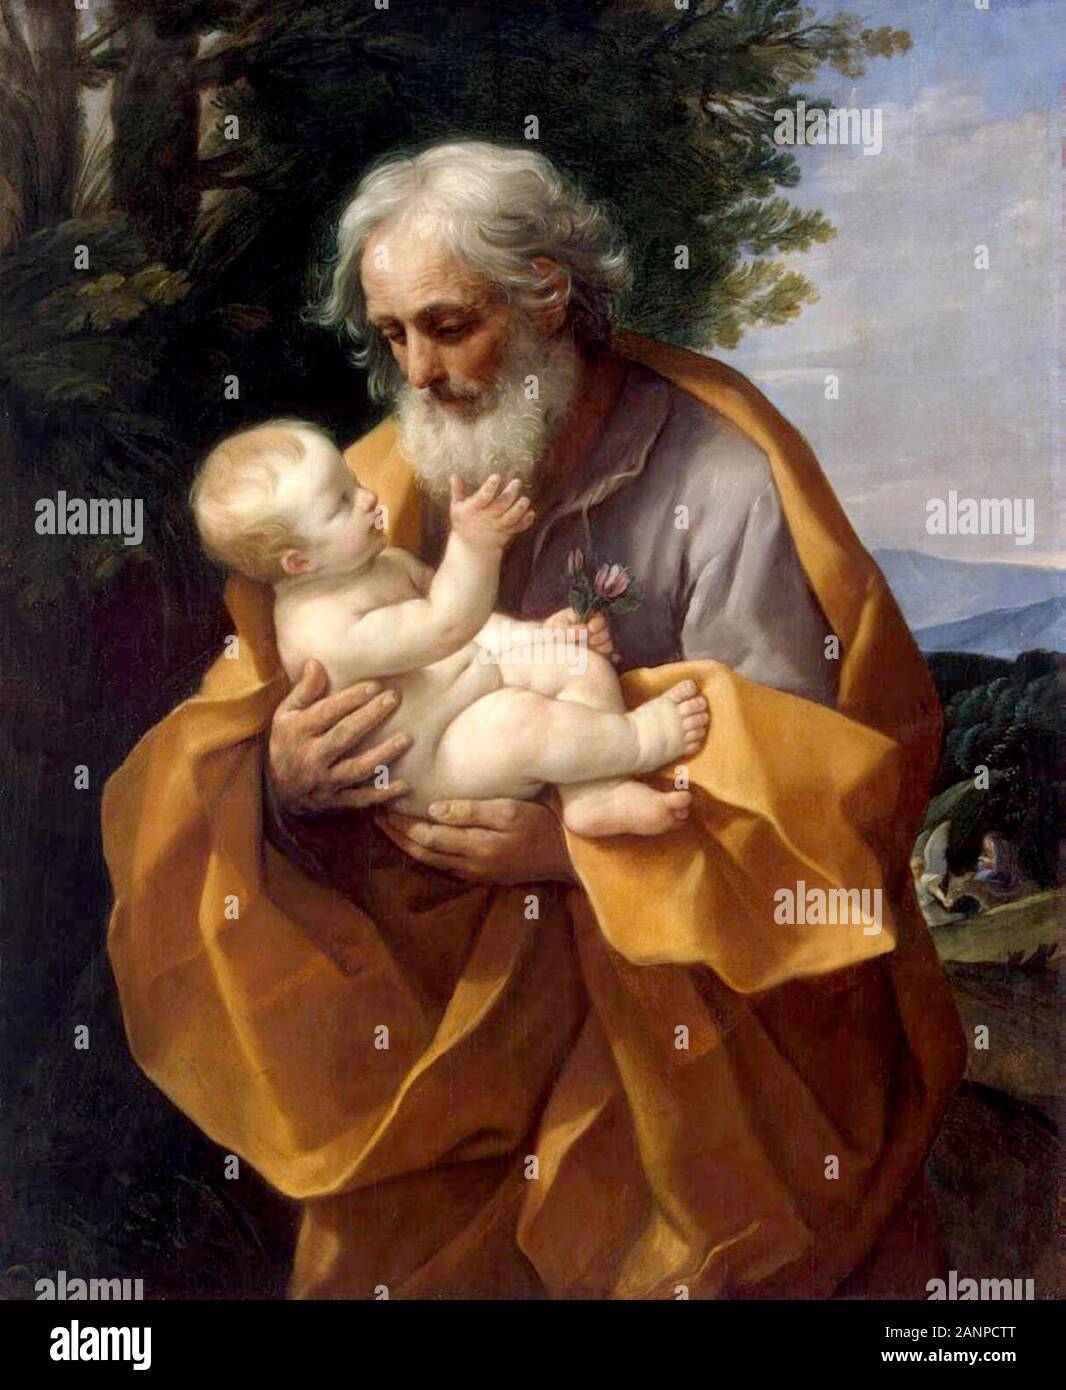 St Joseph with the Infant Jesus by Guido Reni Stock Photo